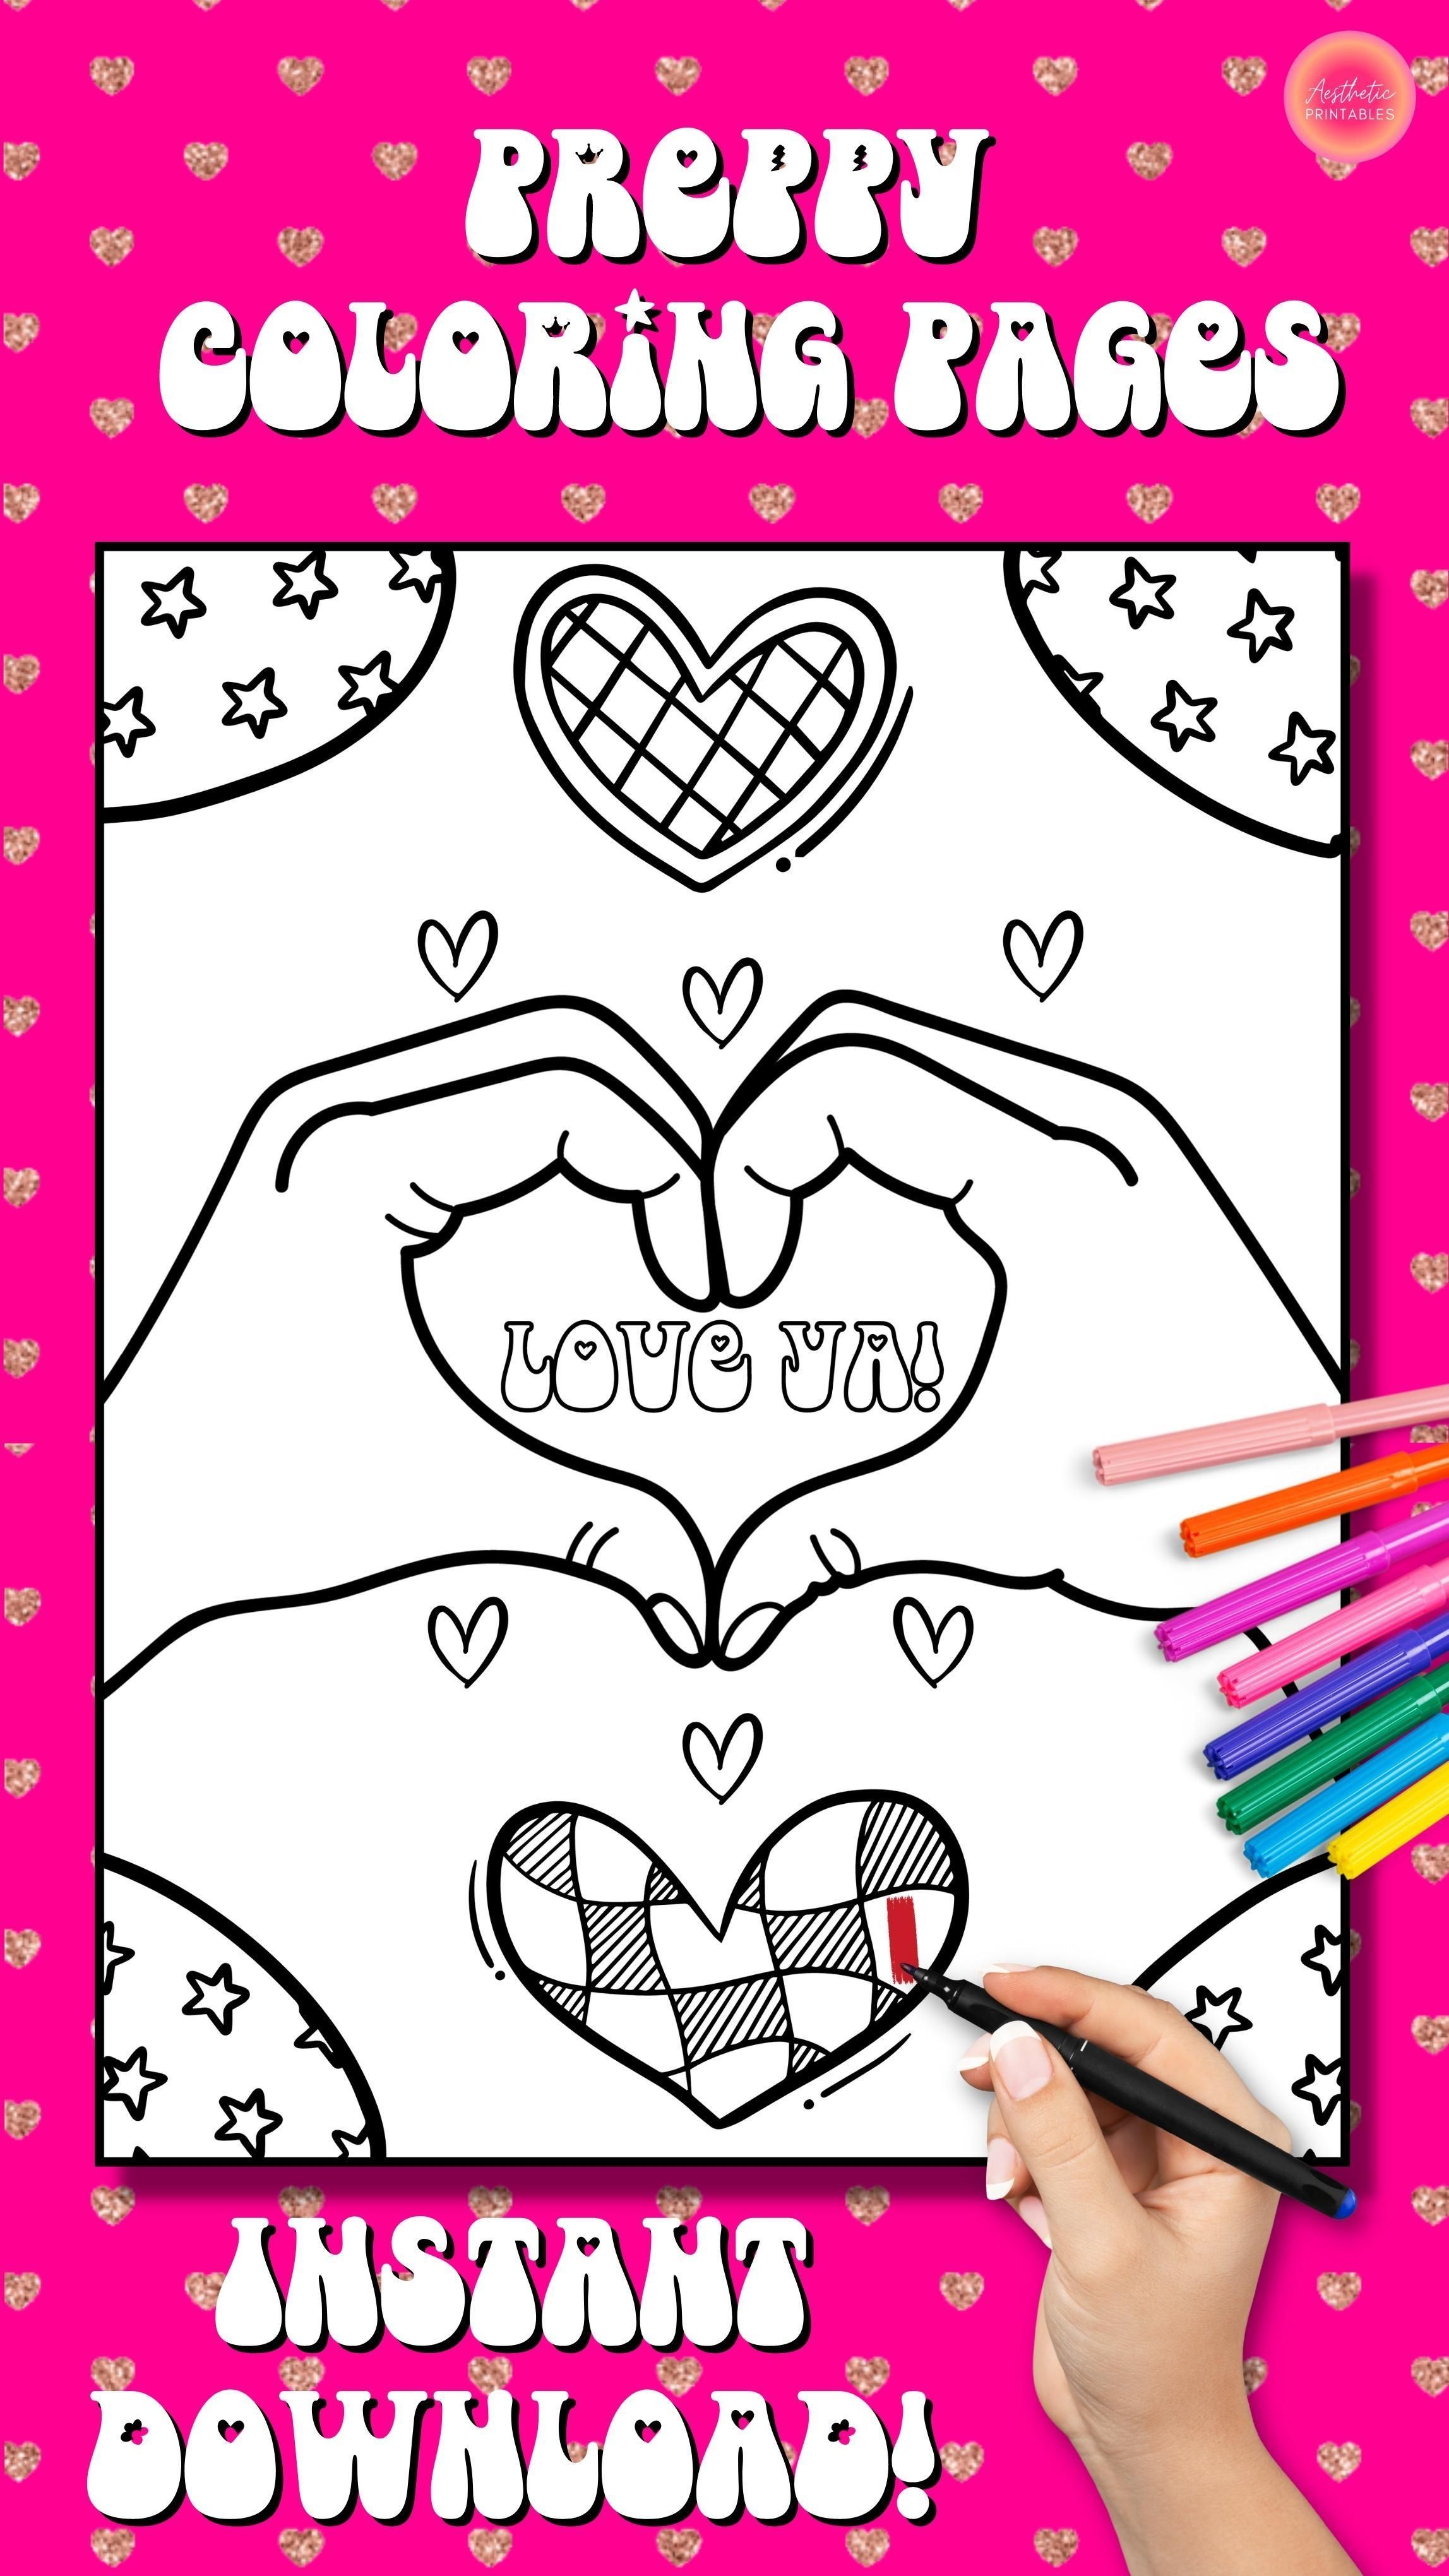 Preppy coloring pages preppy coloring book printable easy aesthetic coloring pages pdf coloring pages for teens procreate coloring